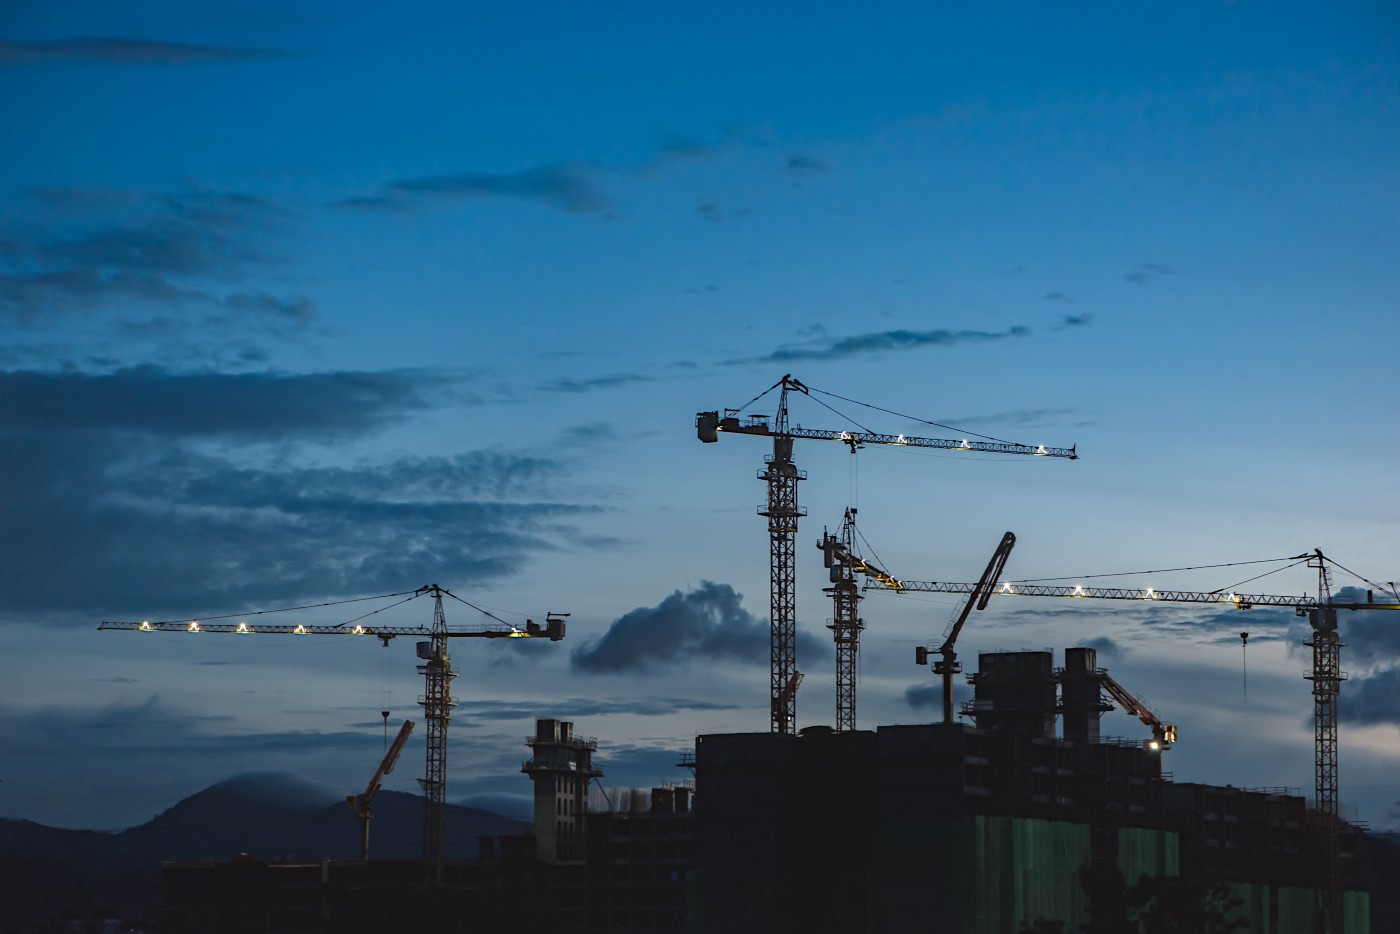 Tower cranes at work on construction site during dusk